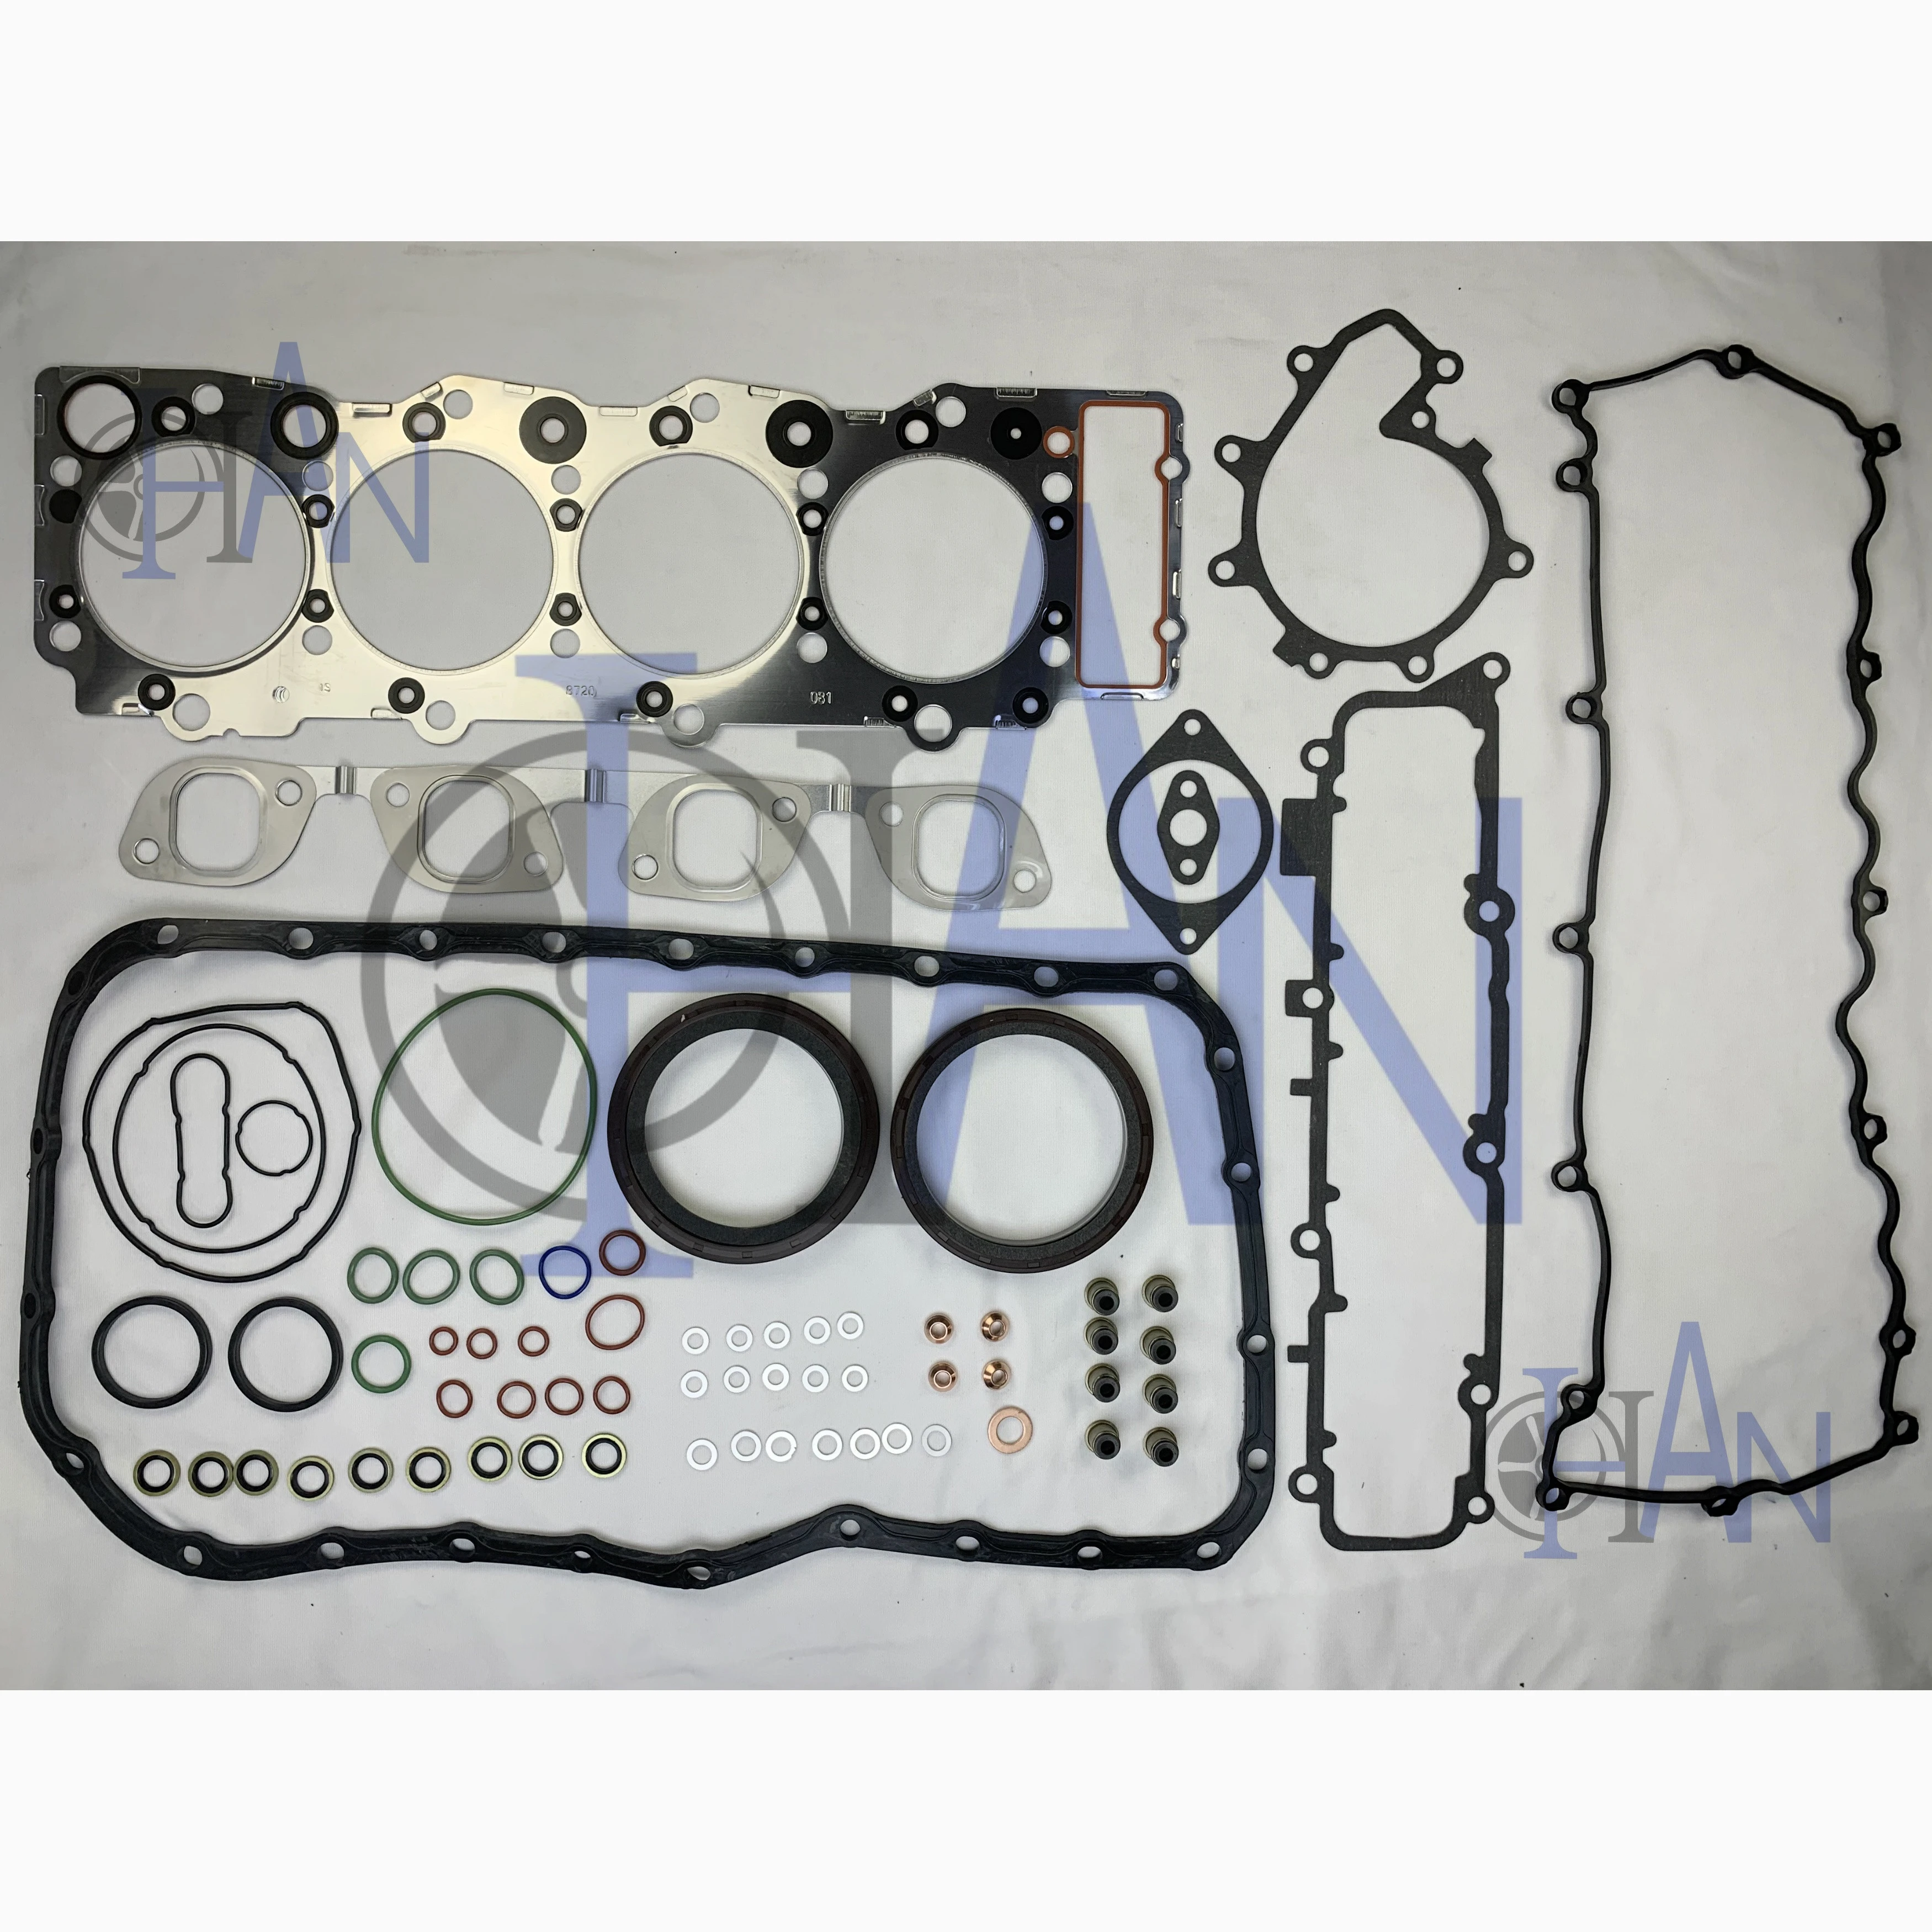 4HE1 4HE1T Cylinder gasket set fit for I suzu 4HE1 4HE1T 4.8L machinery engine spare parts supplier